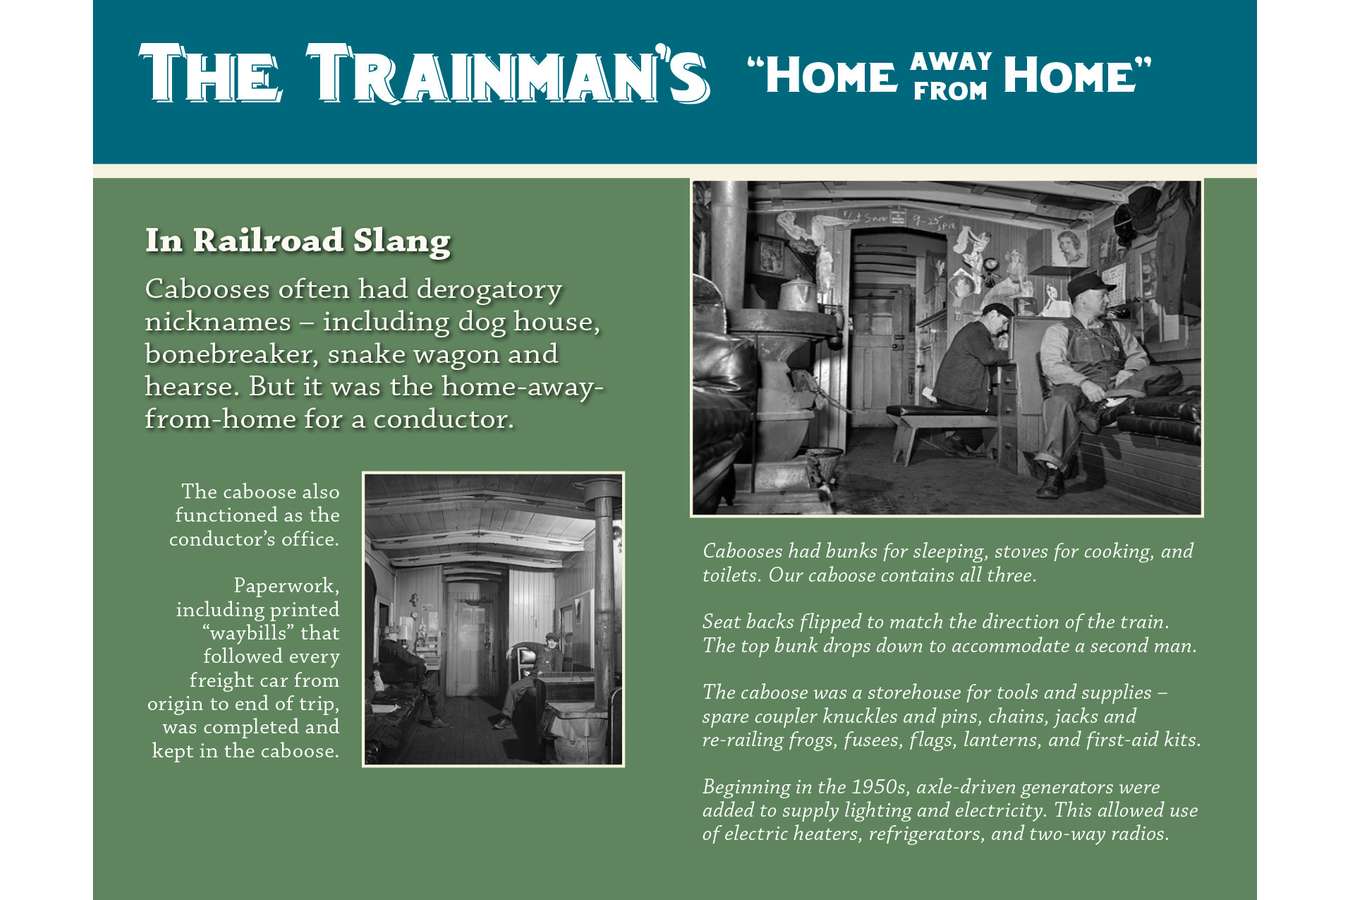 5 CABOOSE  : Climb aboard the caboose and learn about the trainman's "Home-away-from-home"